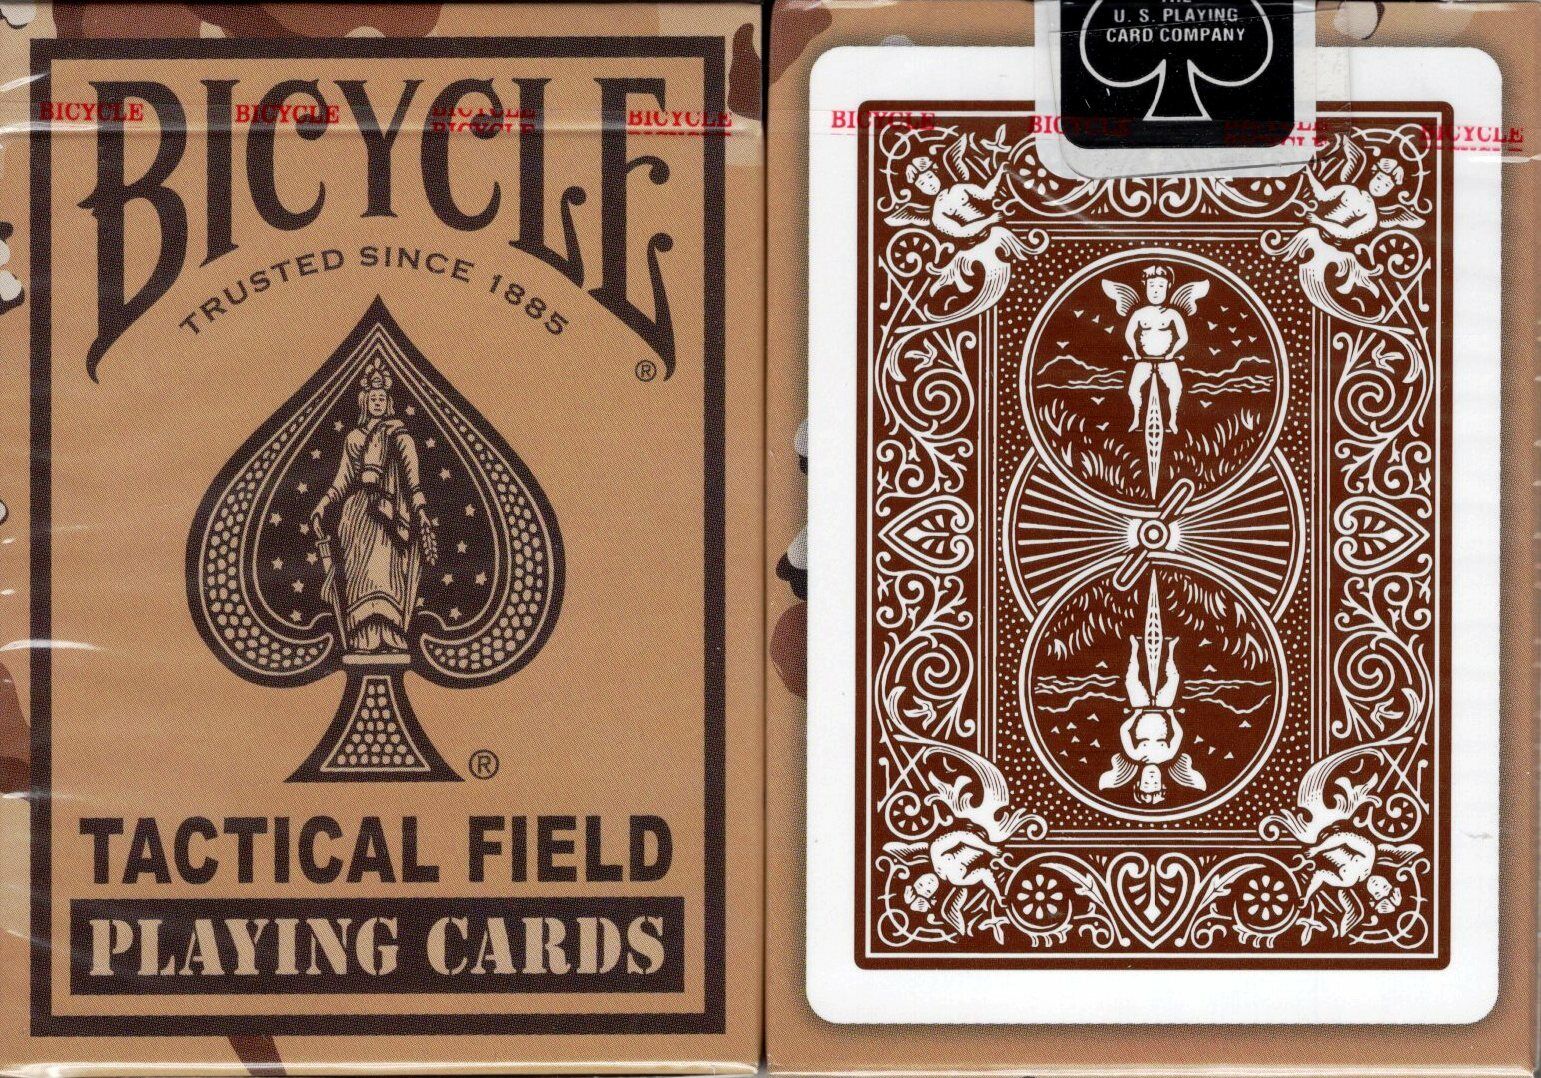 Tactical Field Desert Brown Bicycle Playing Cards Poker Size Deck USPCC Custom